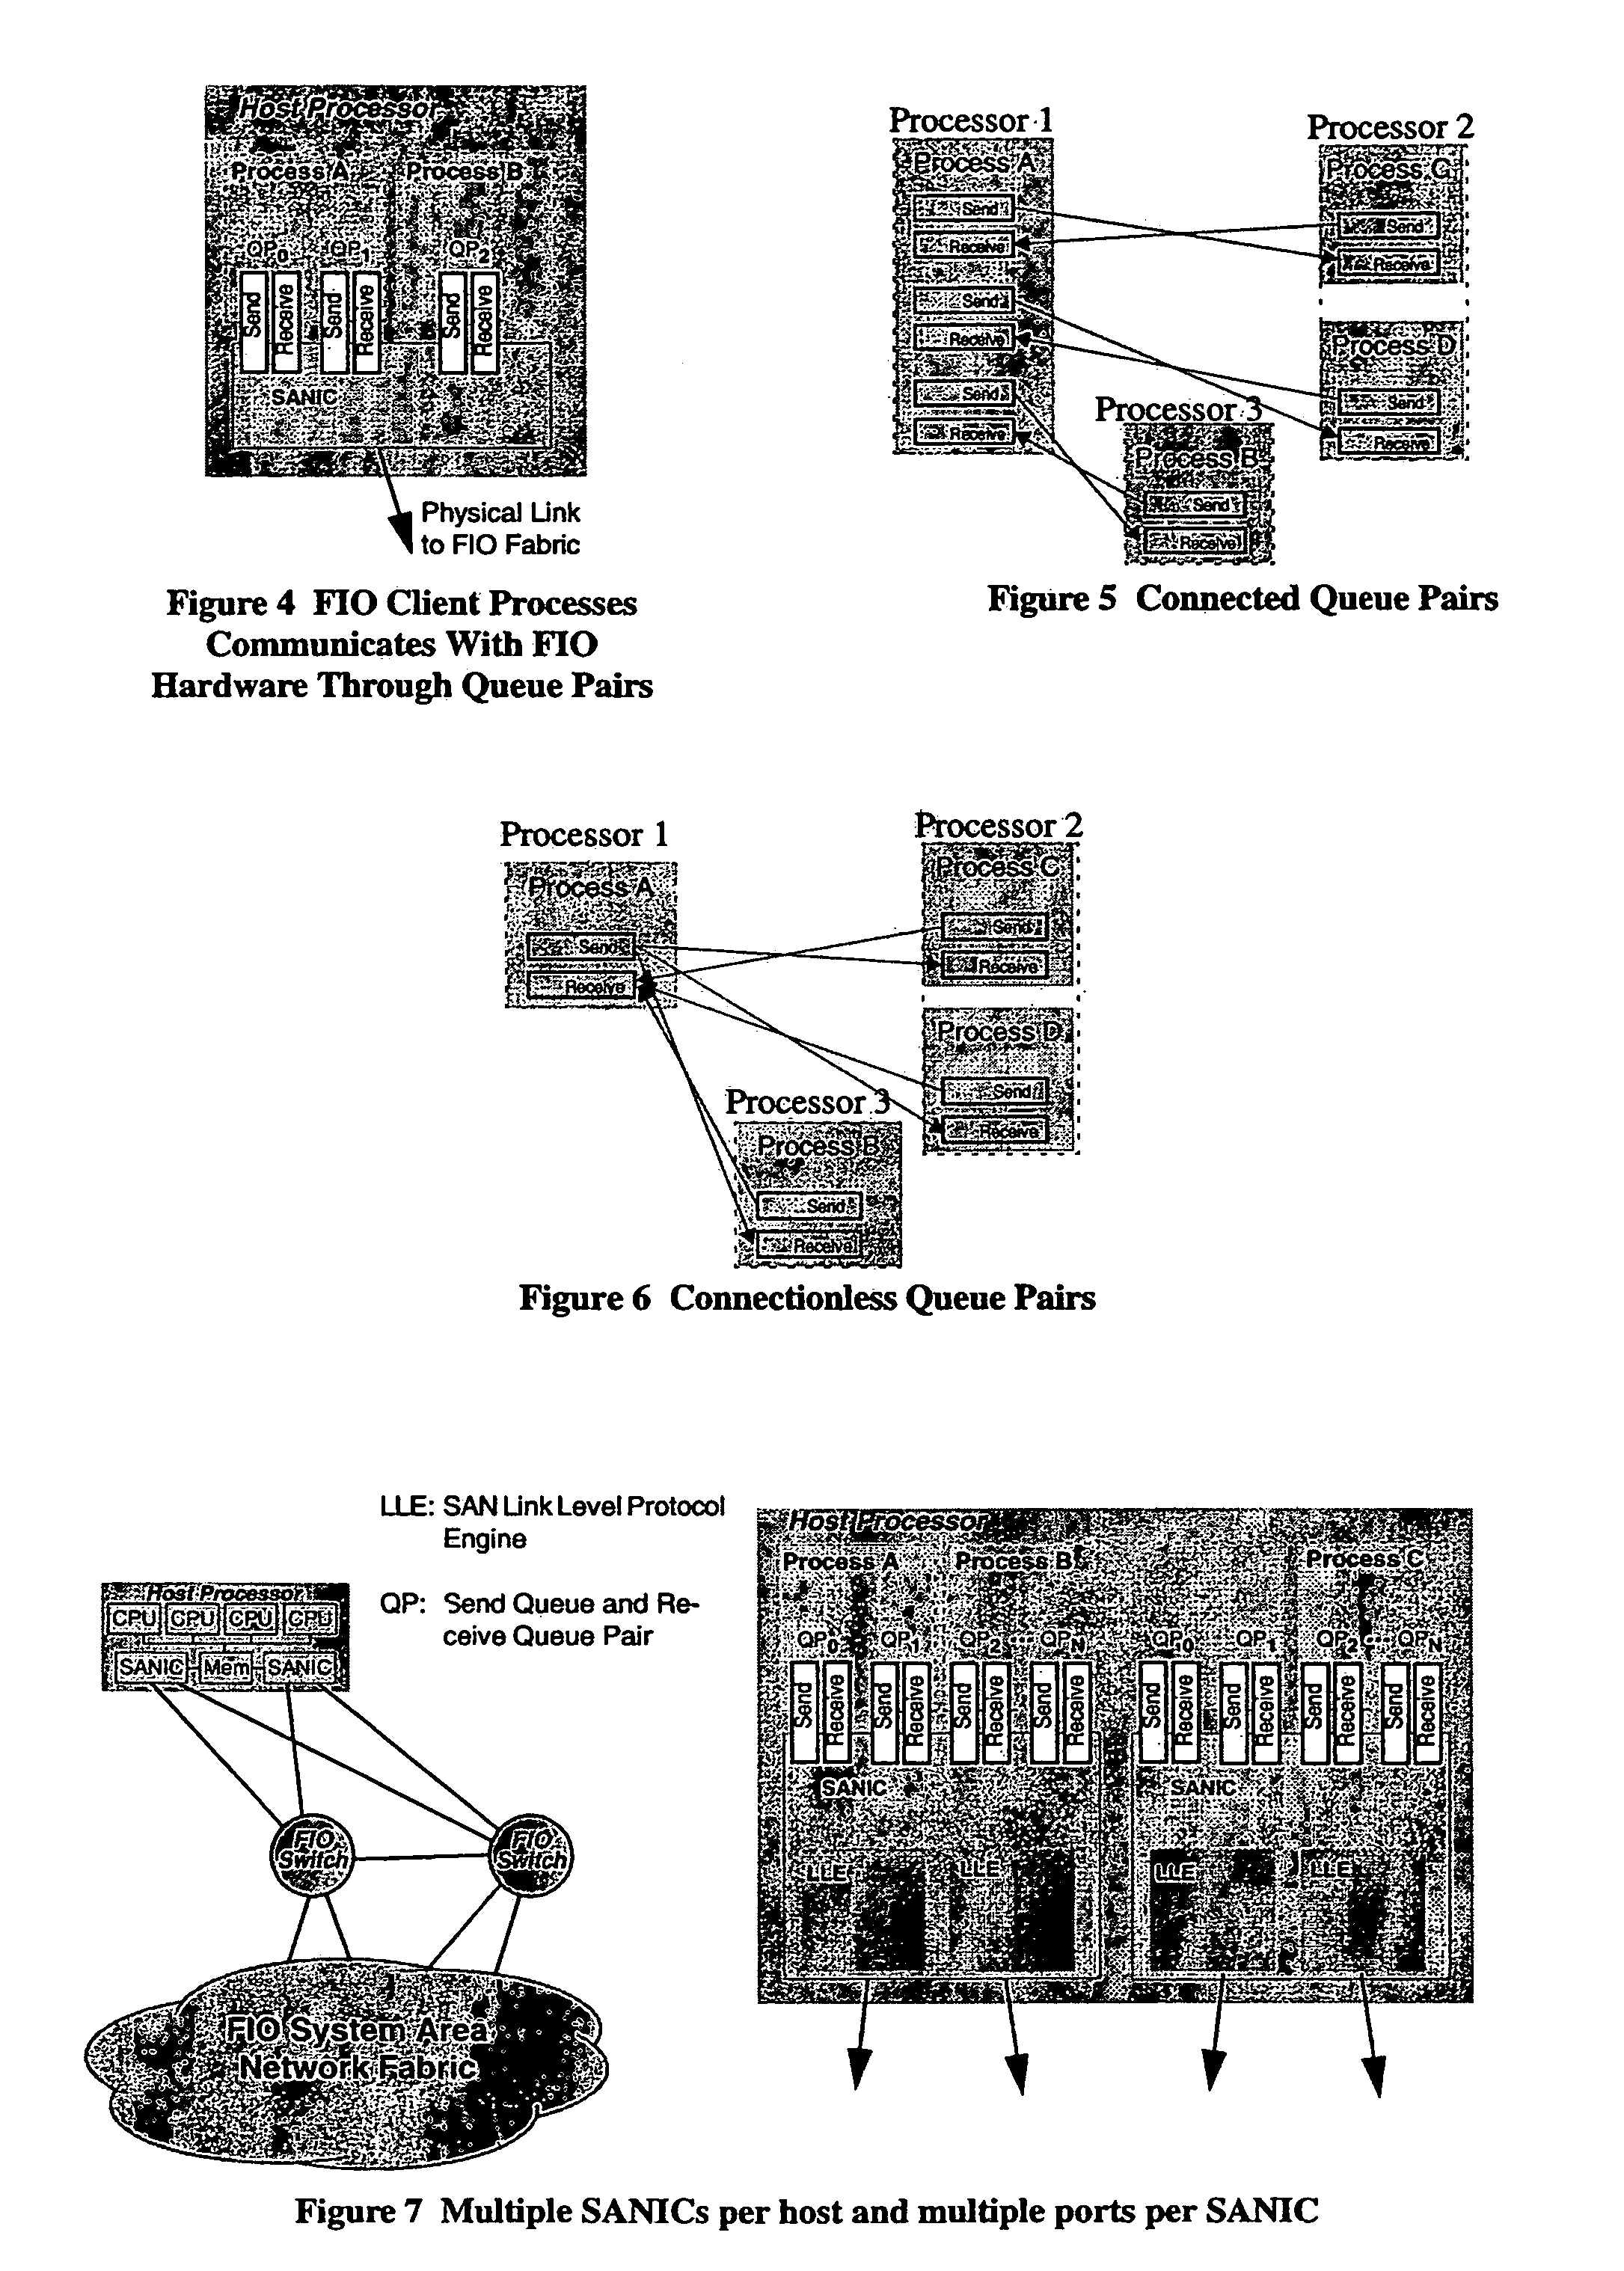 Method for training a communication link between ports to correct for errors